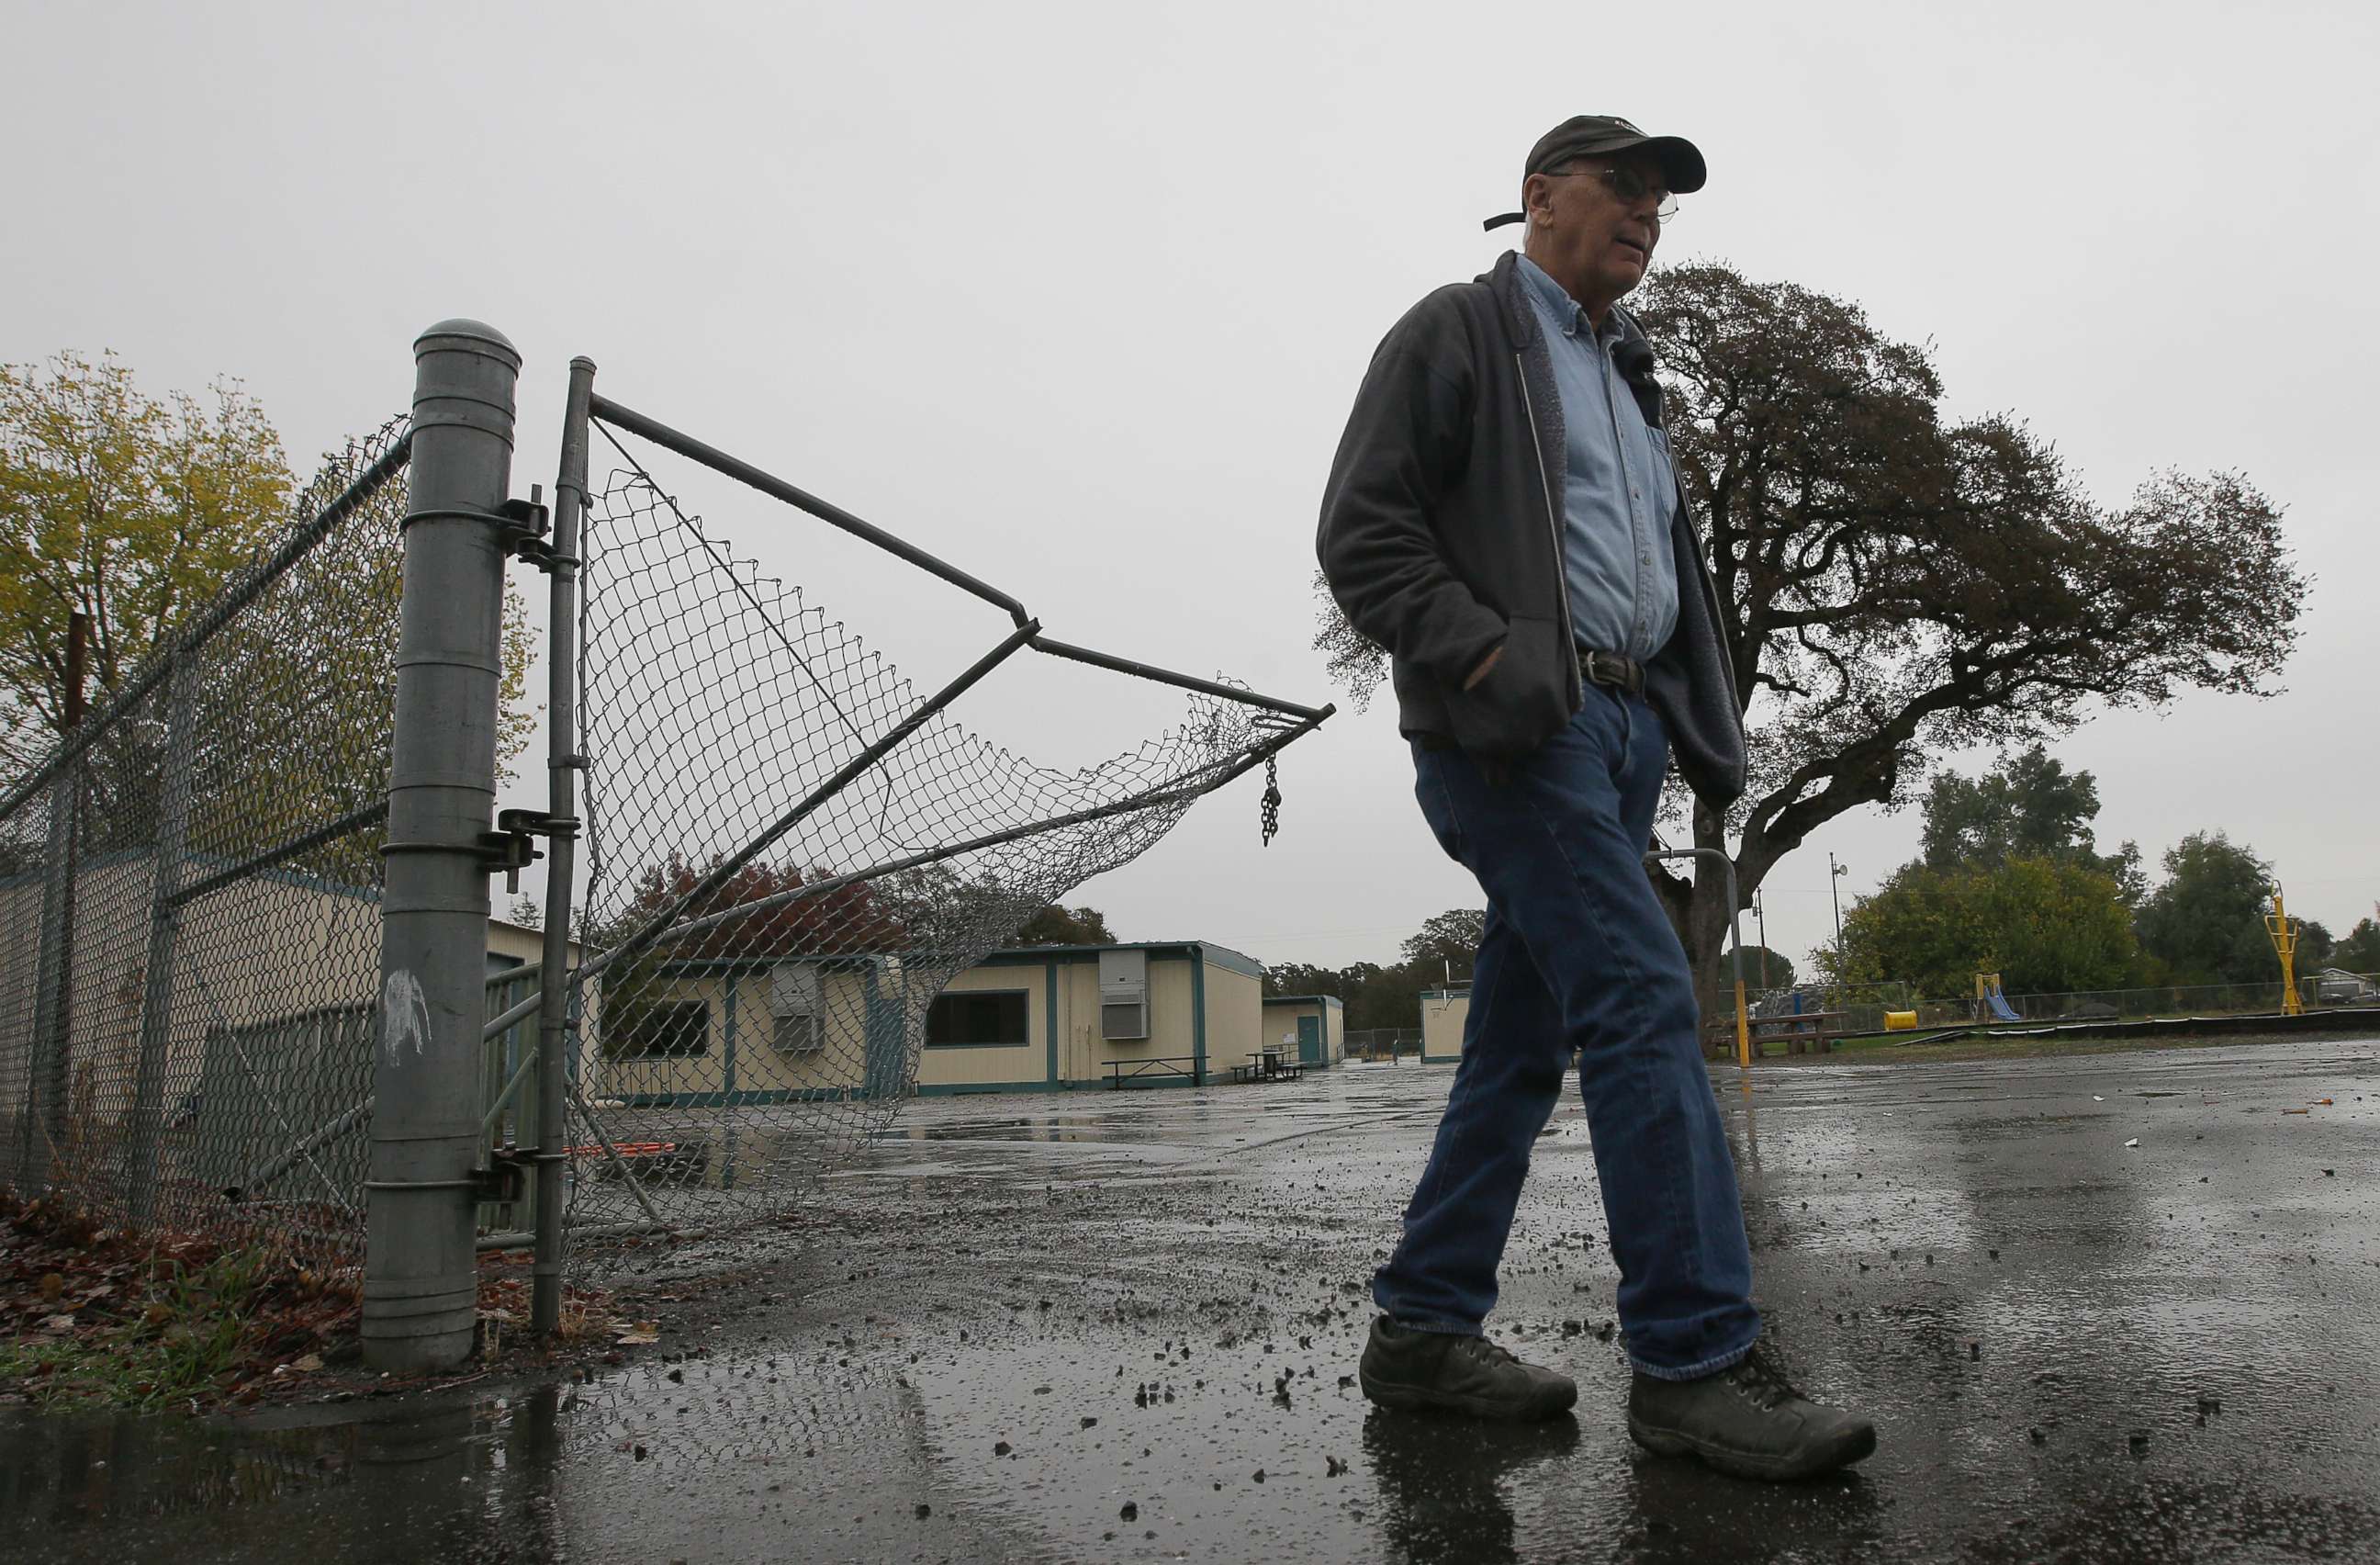 PHOTO: Randy Morehouse, the maintenance and operations supervisor for the Corning Elementary School District, walks past the gate that gunman Kevin Janson Neal crashed through during his shooting rampage at Rancho Tehama Elementary School, Nov. 15, 2017.